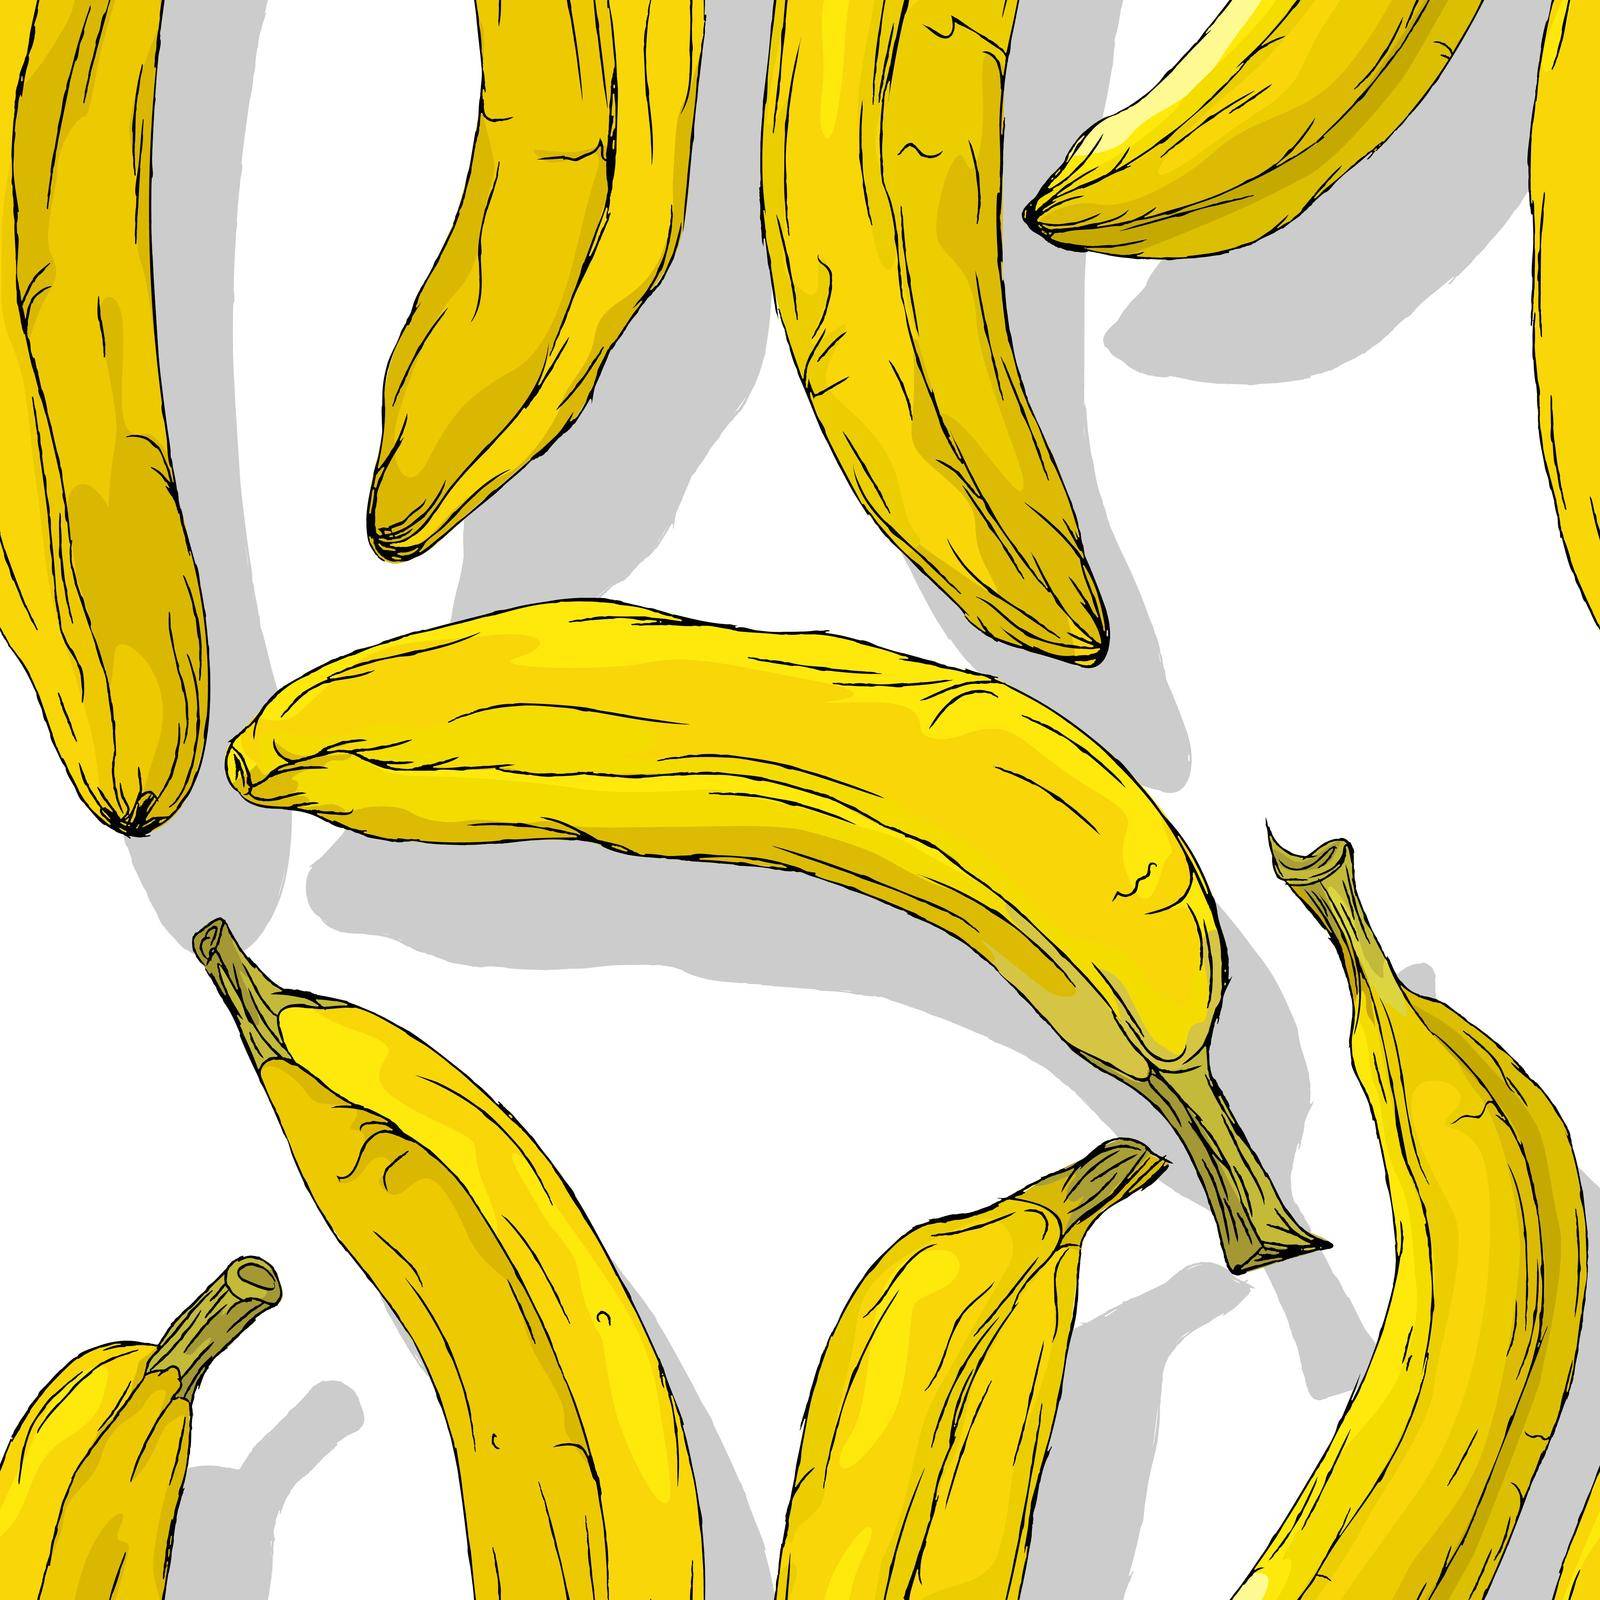 Bananas repeating pattern by Lirch